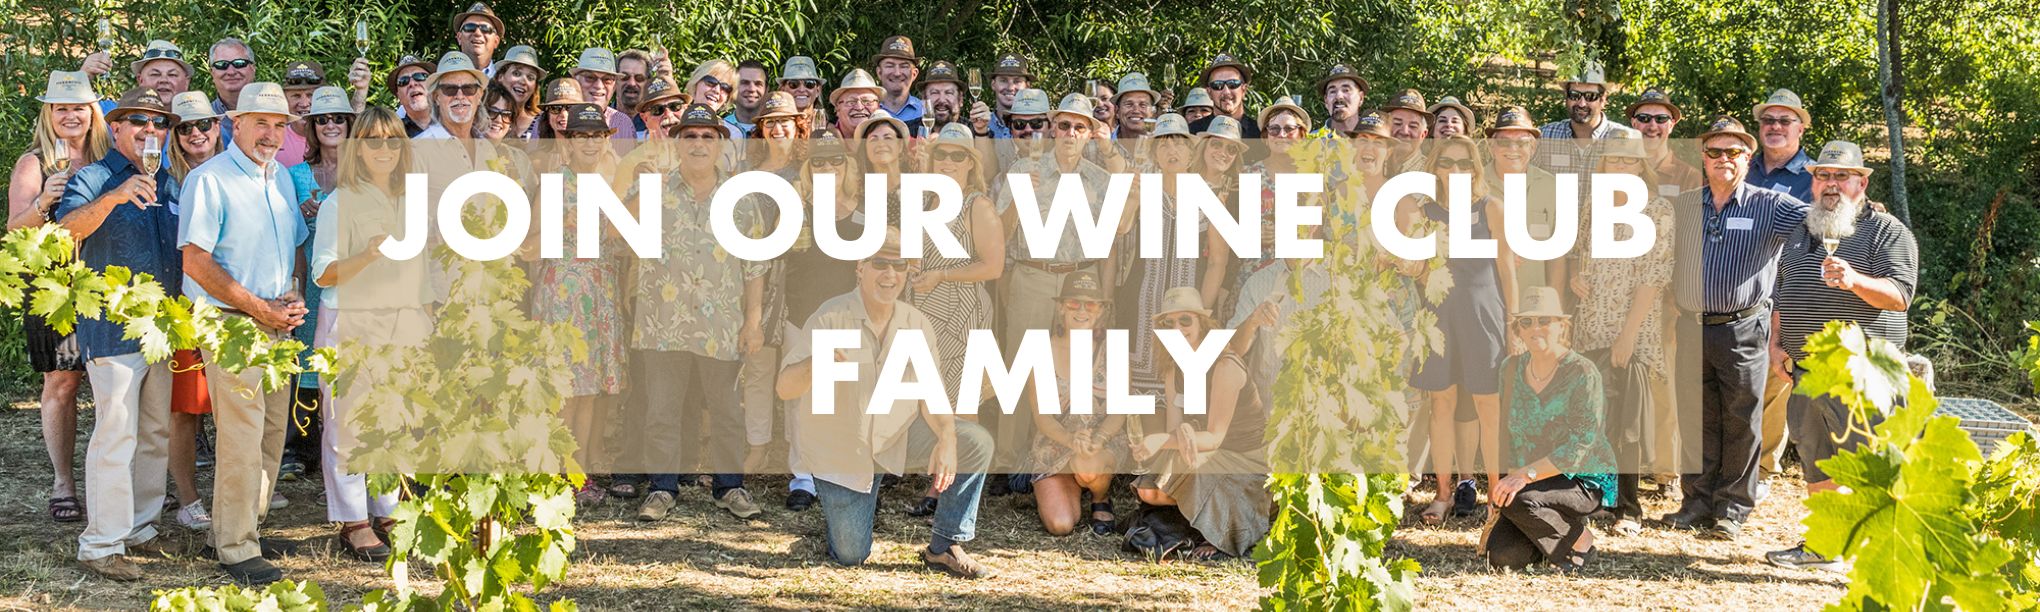 JOIN OUR WINE CLUB FAMILY.jpg